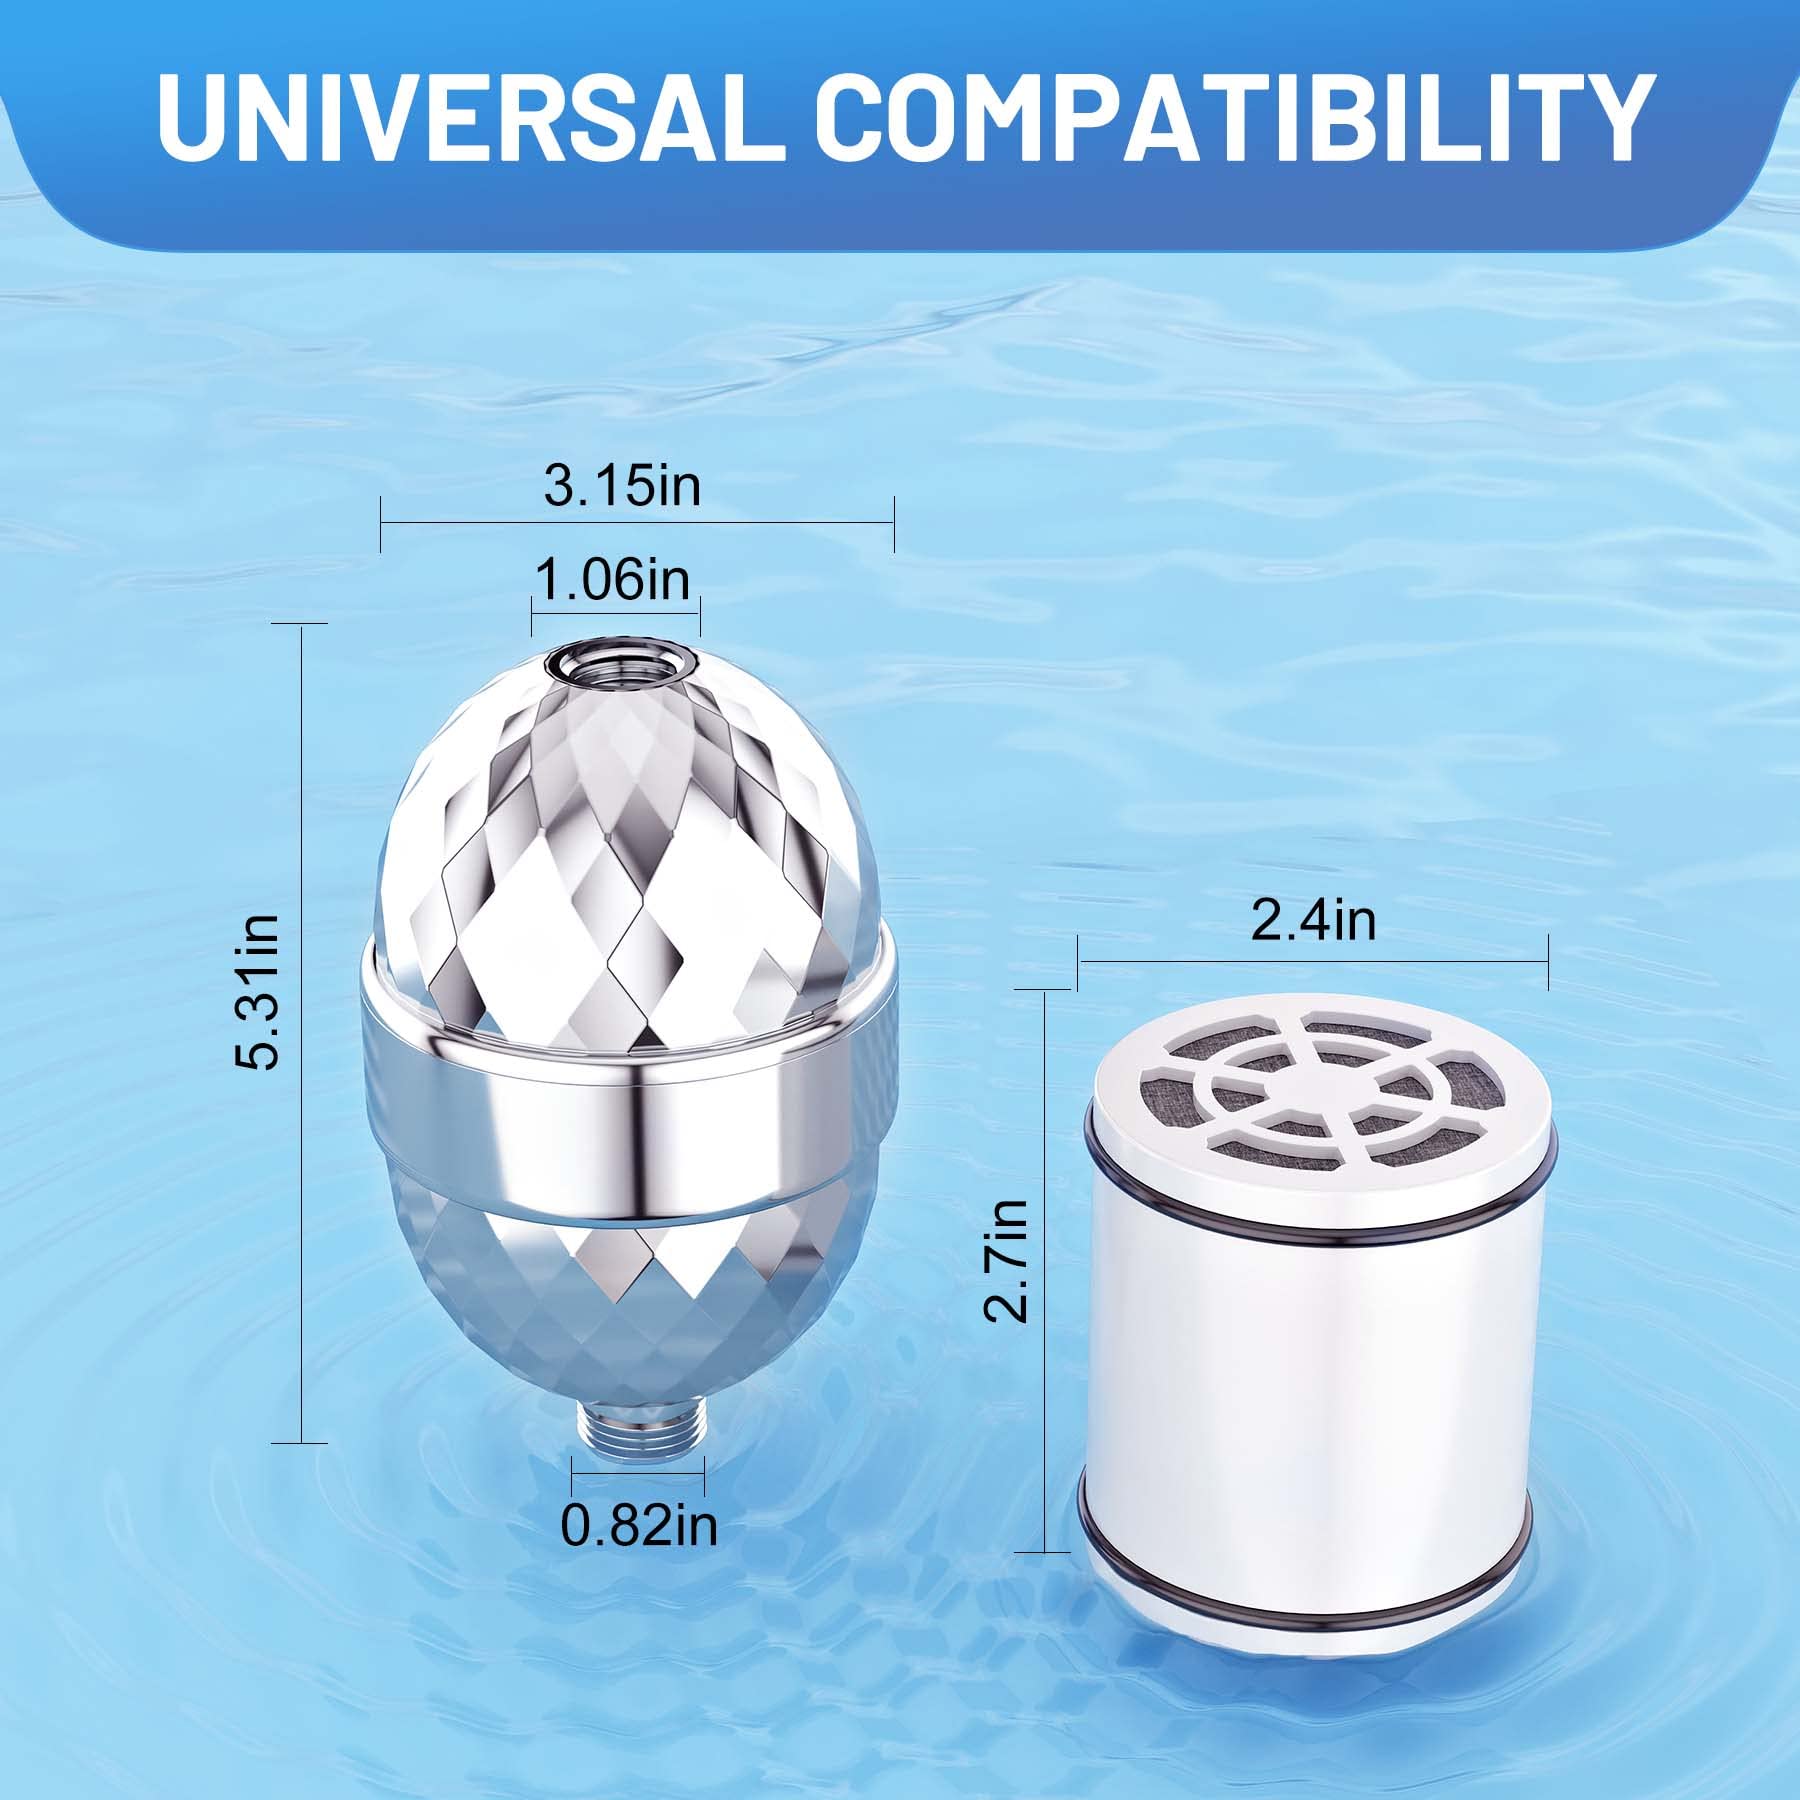 20 Stage Shower Filter Shower Head Filter with 2 Replaceable Cartridges High Output Shower Water Filter for Hard Water Removing Chlorine Fluoride Heavy Metals，Polished Chrome